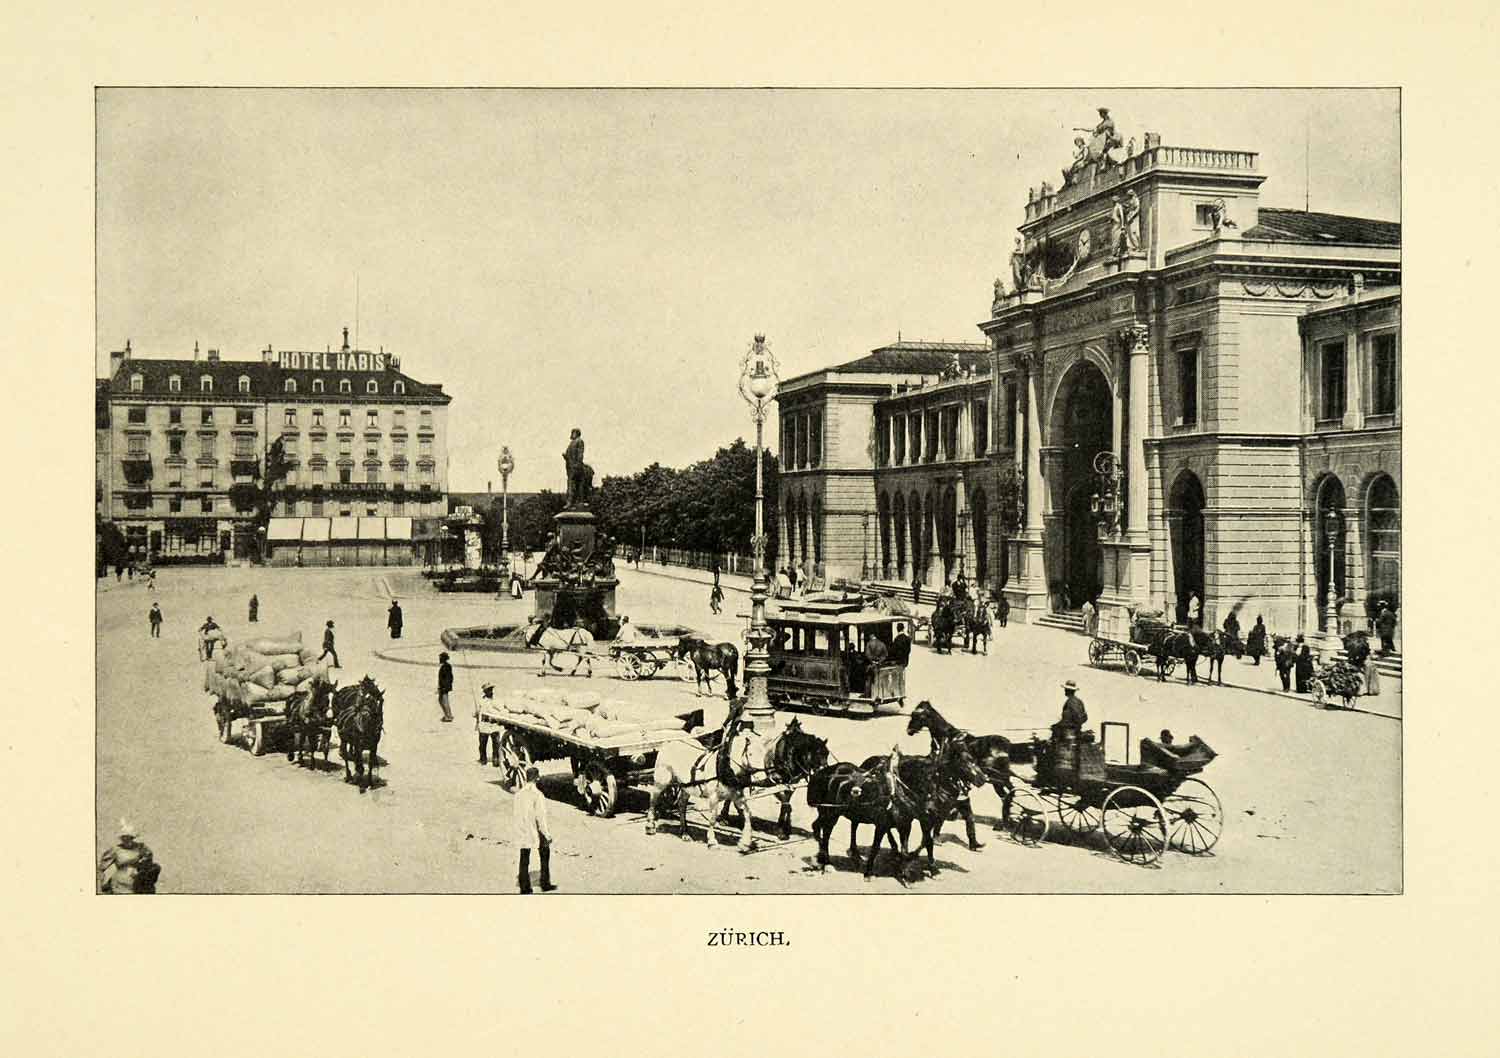 1901 Print Zurich City Switzerland Architecture Horses Carriages Downtown XGN3